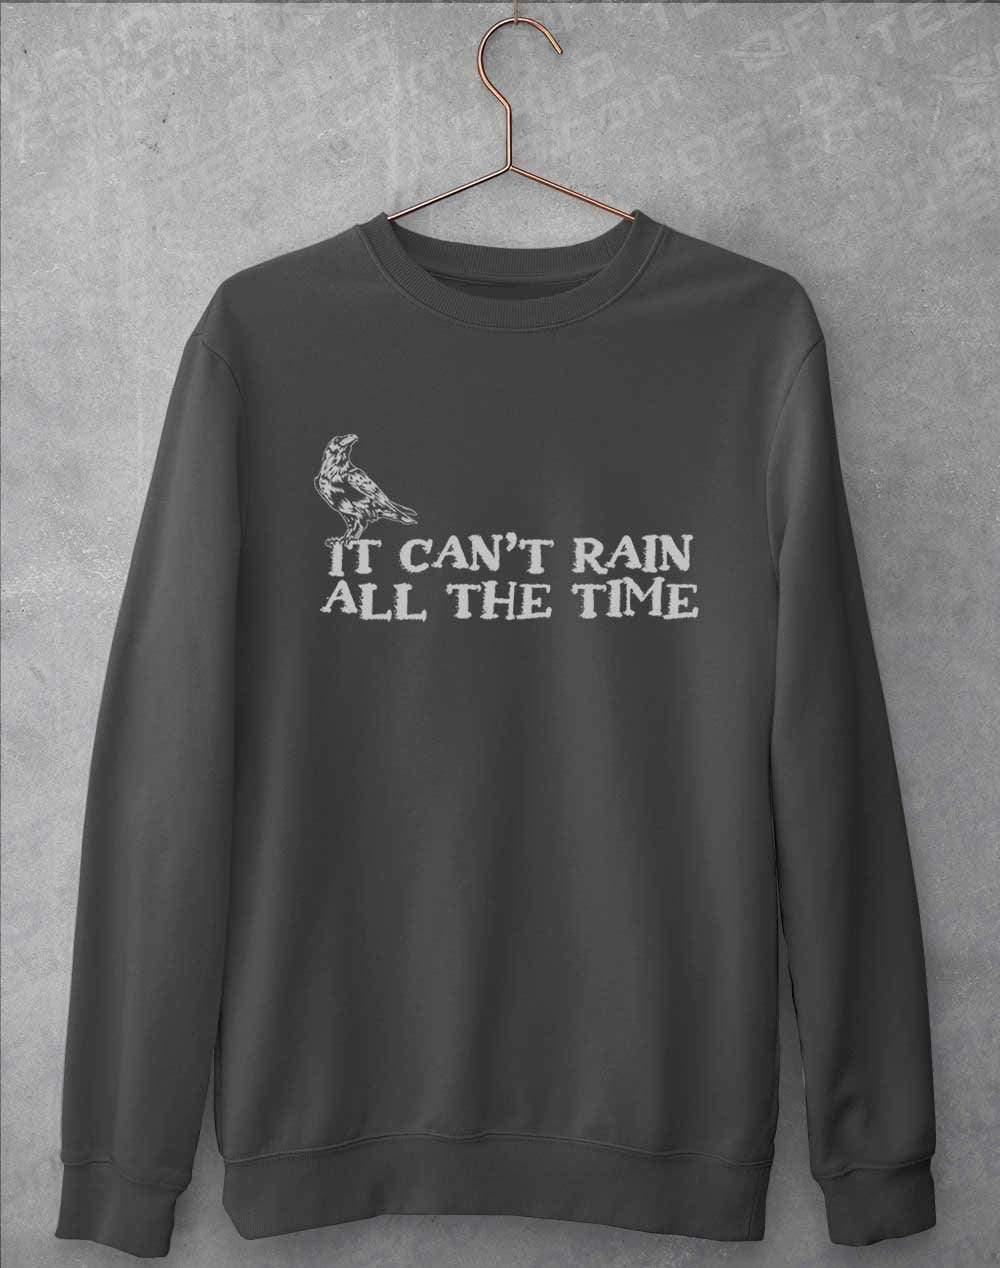 It Can't Rain All the Time Sweatshirt S / Charcoal  - Off World Tees